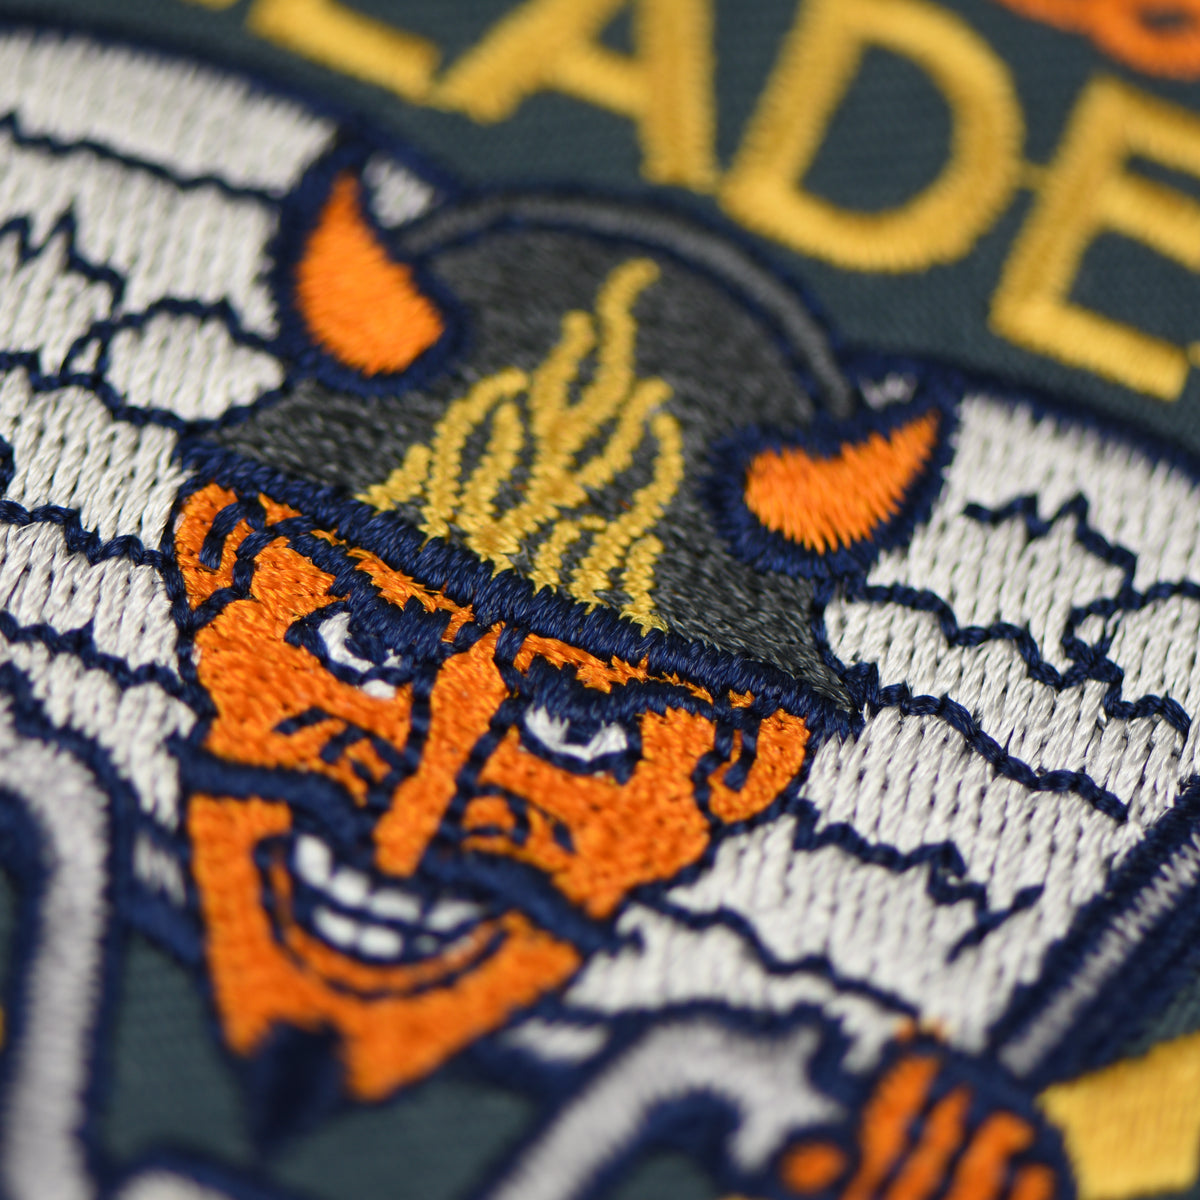 Speed Reader Patch with a closeup of an orange faced devil riding a bike with a book behind him